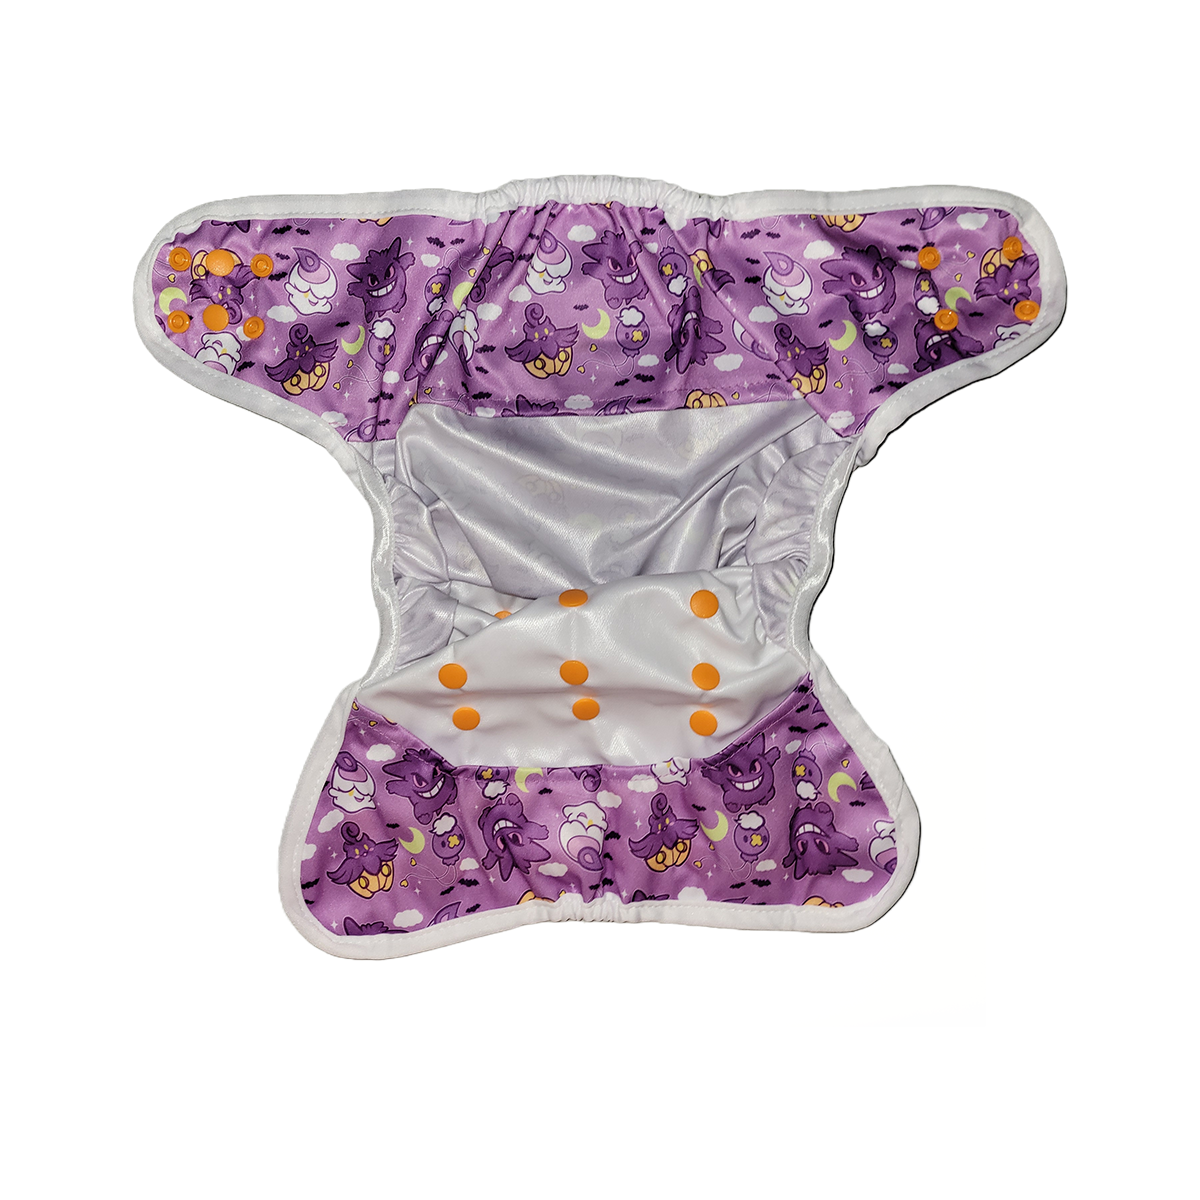 Mid-Size/ One Size Diaper Cover - Ghost Type